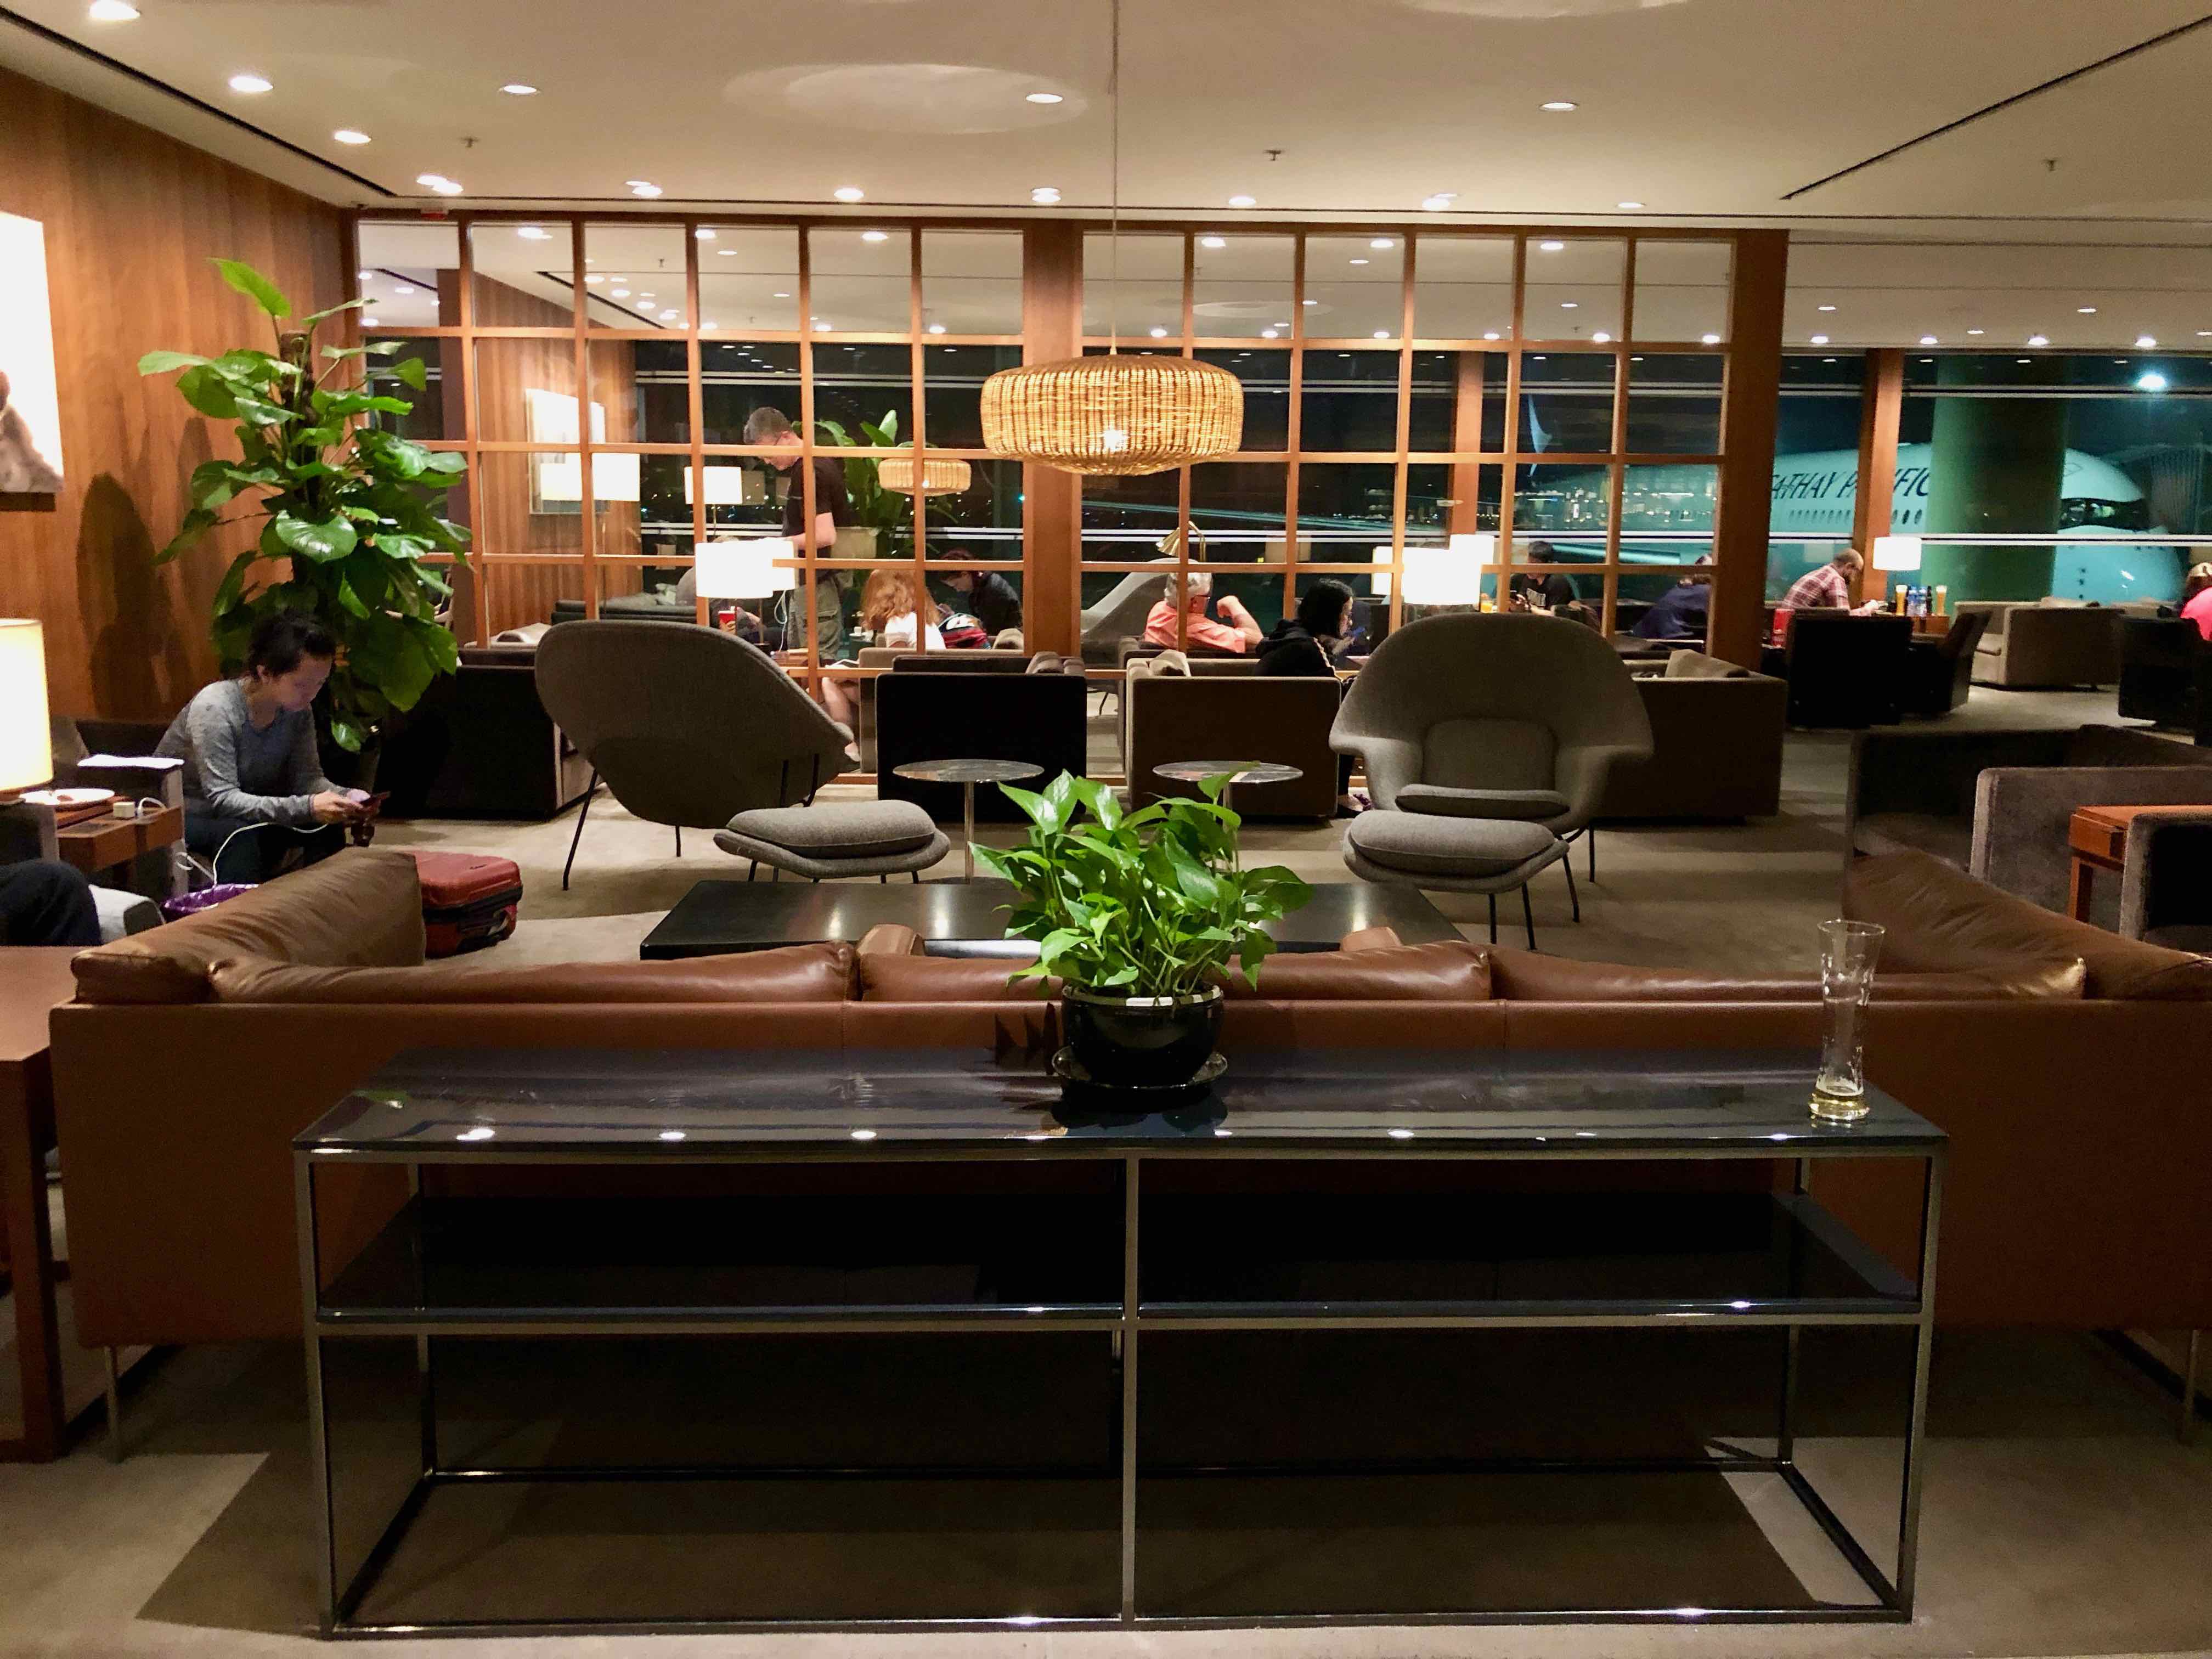 Cathay Pacific The Pier Business Class Lounge Hong Kong seating option